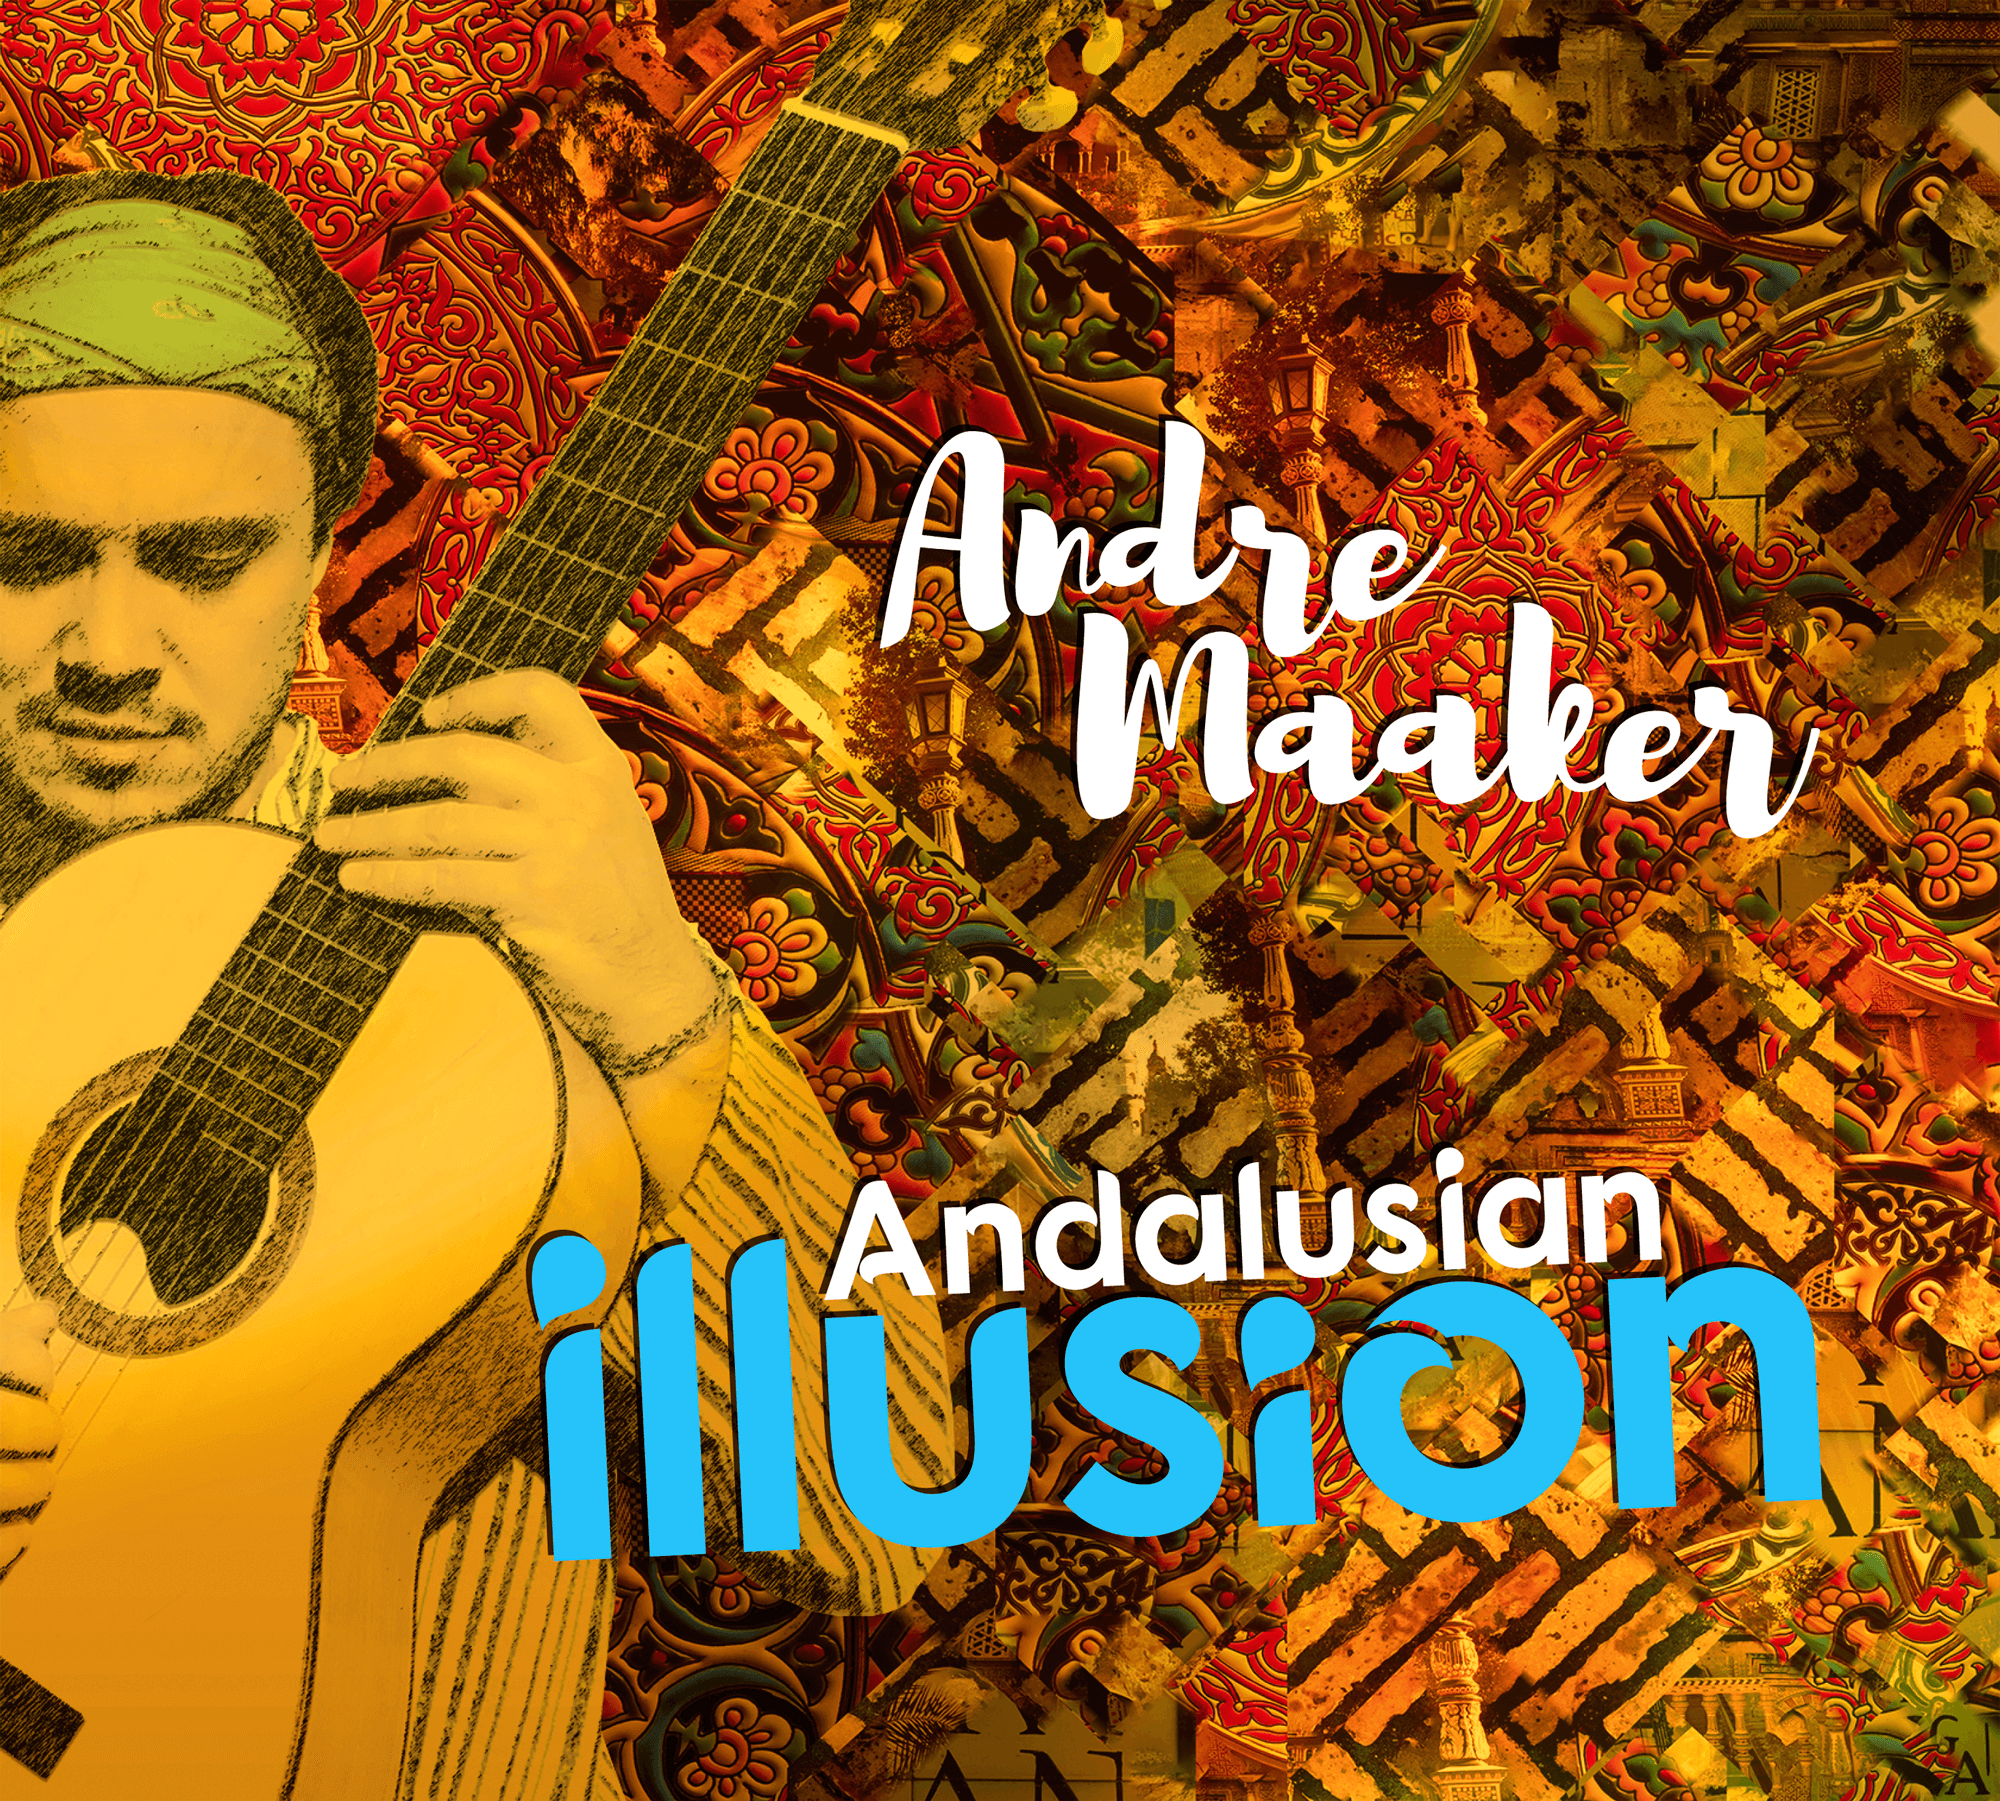 ANDRE MAAKER - ANDALUSIAN ILLUSION (2016) CD